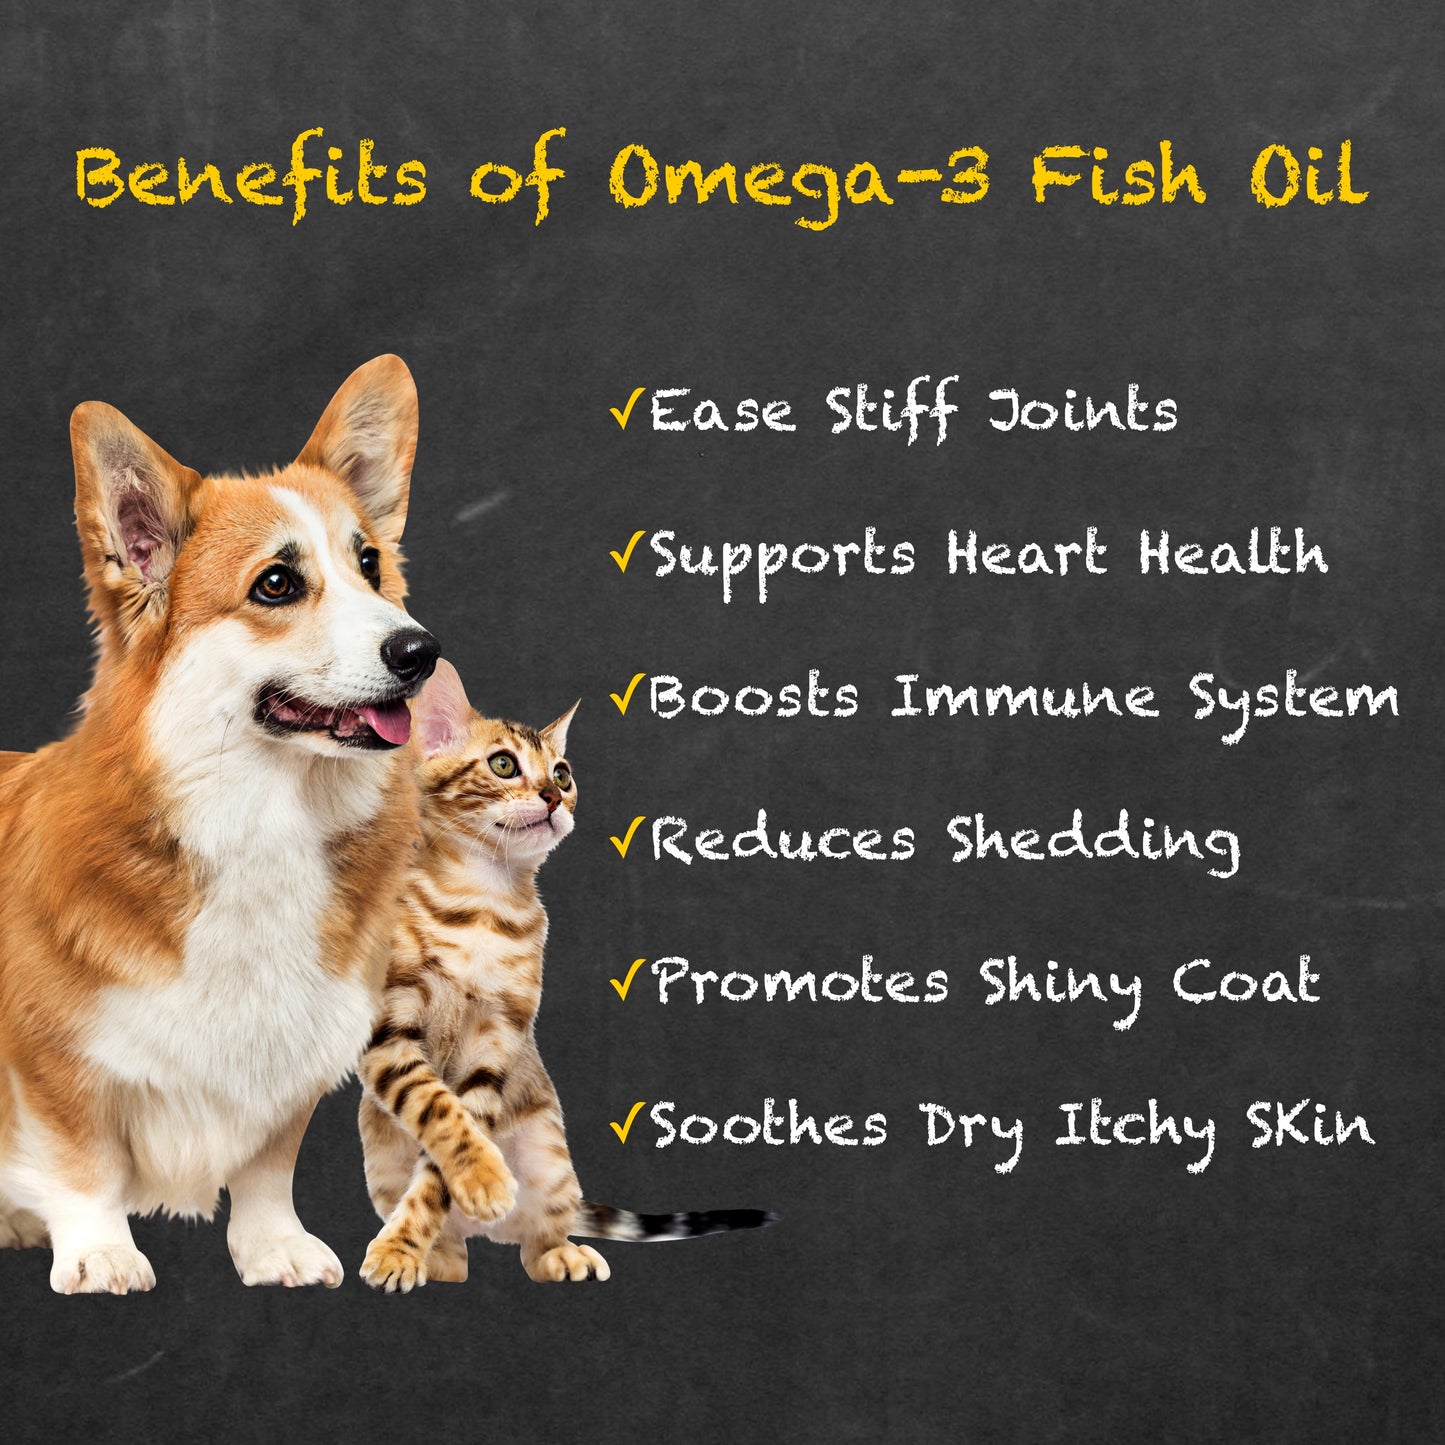 Deluxe Naturals Omega-3 Fish Oil for Dogs and Cats - 32 fl. oz.